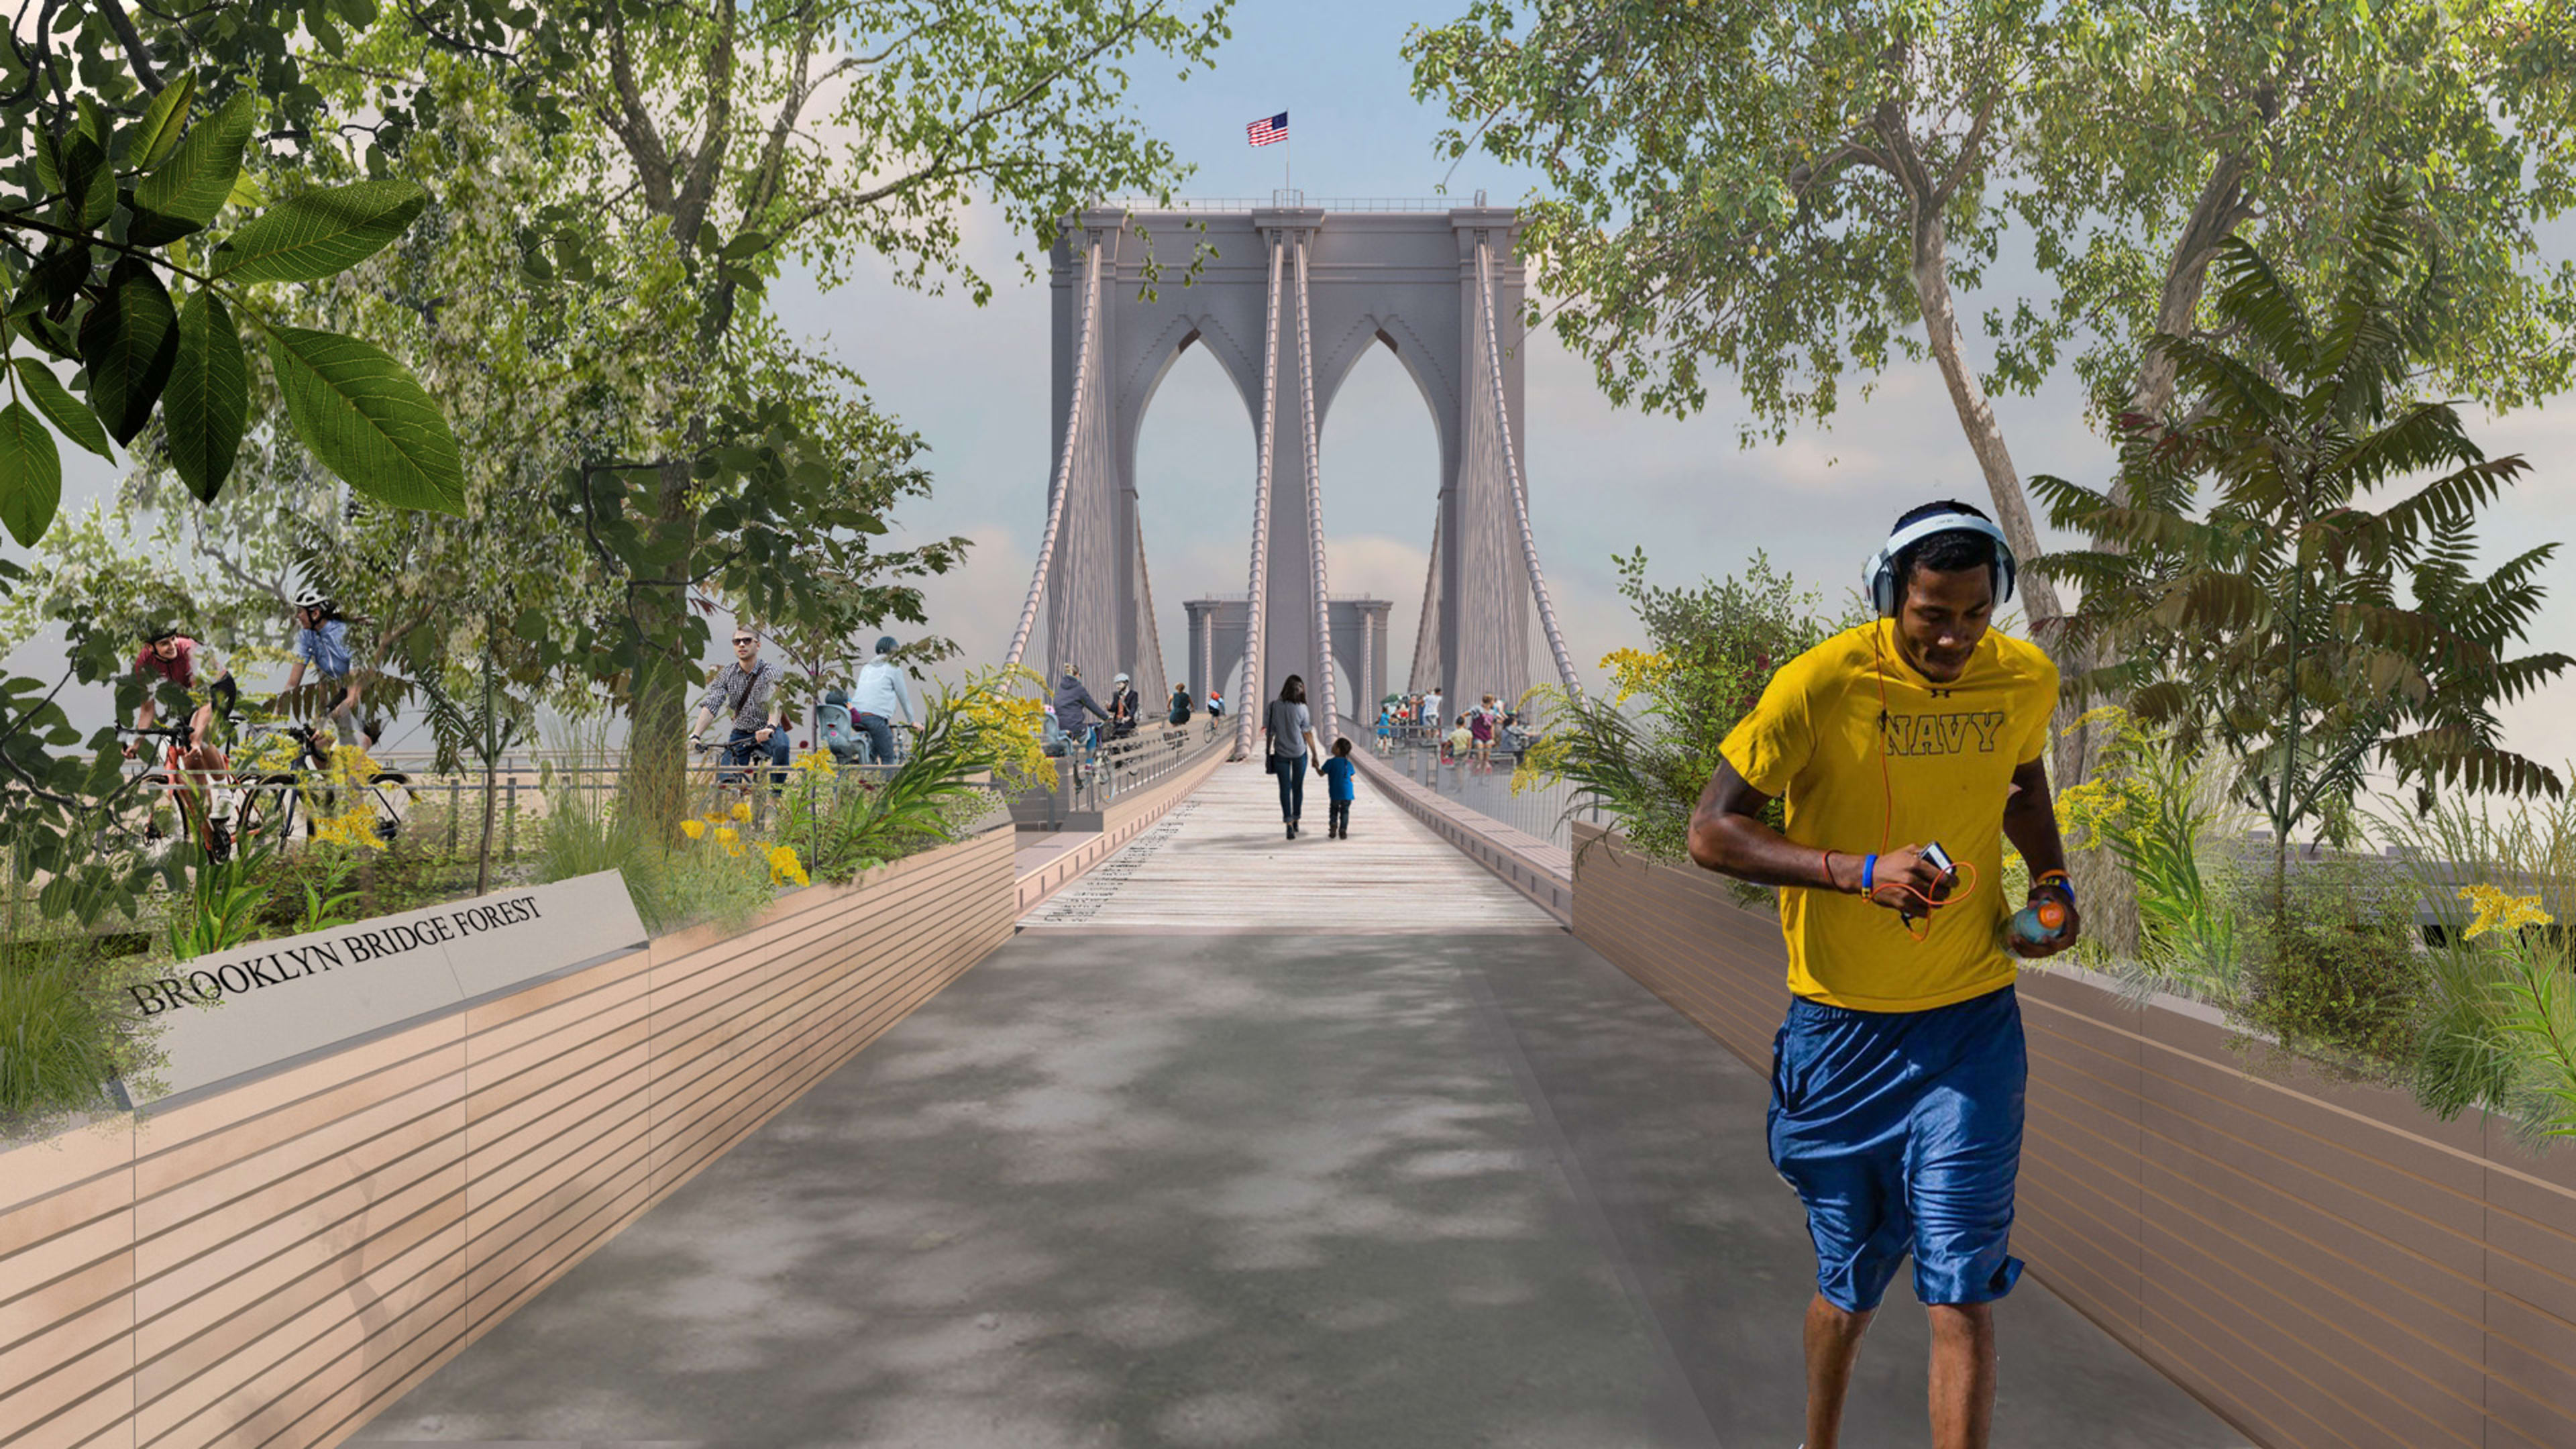 This redesign of the Brooklyn Bridge involves a Guatemalan forest